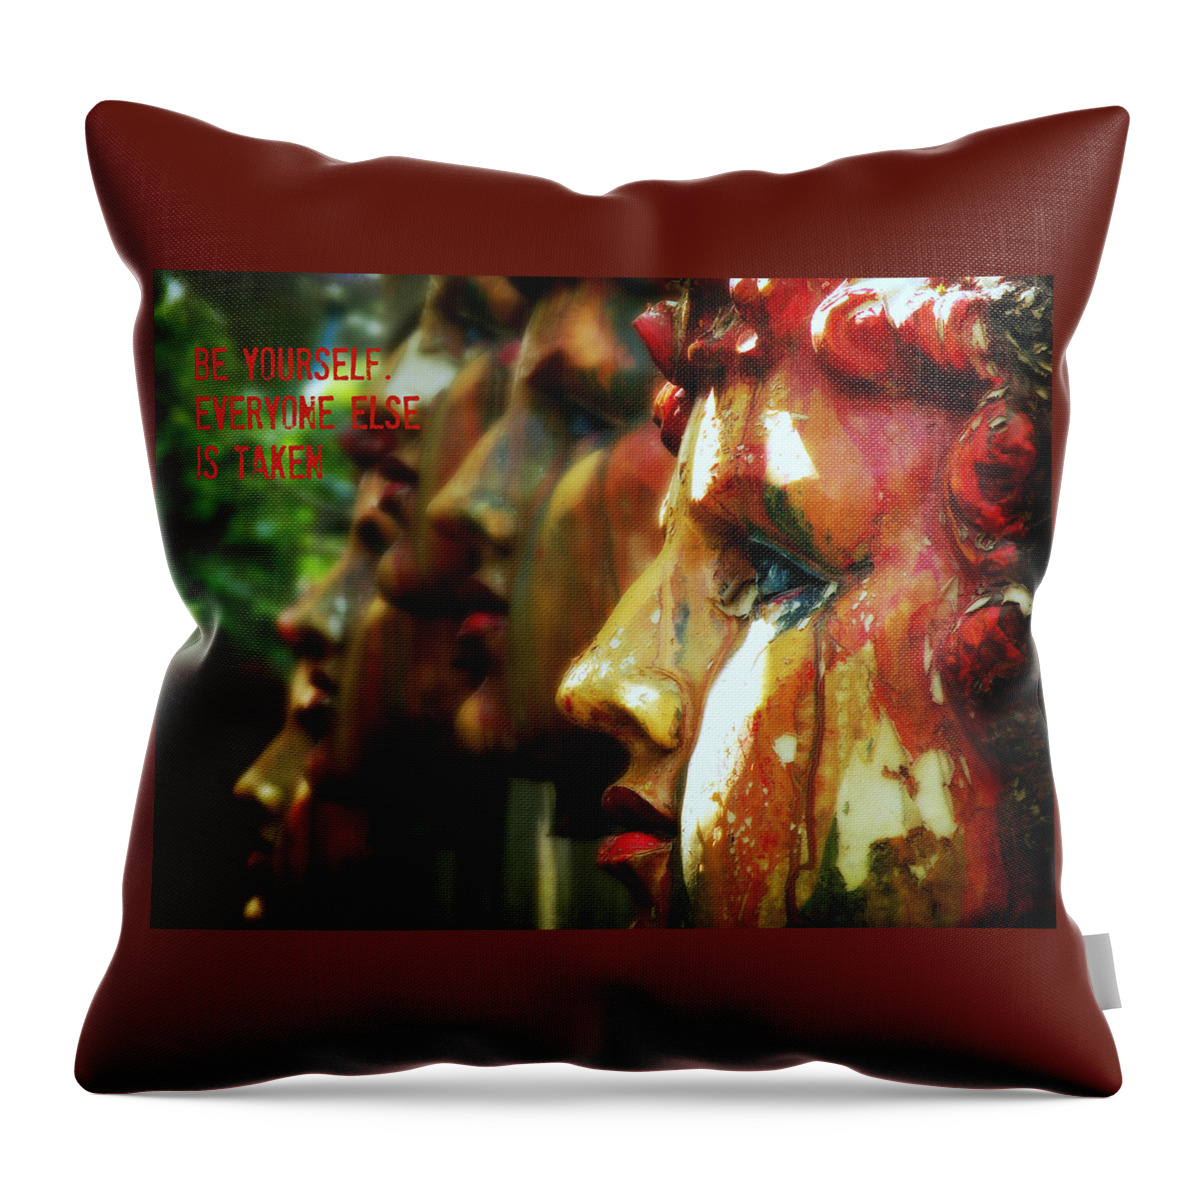 Inspirational Throw Pillow featuring the photograph Be Yourself by Micki Findlay